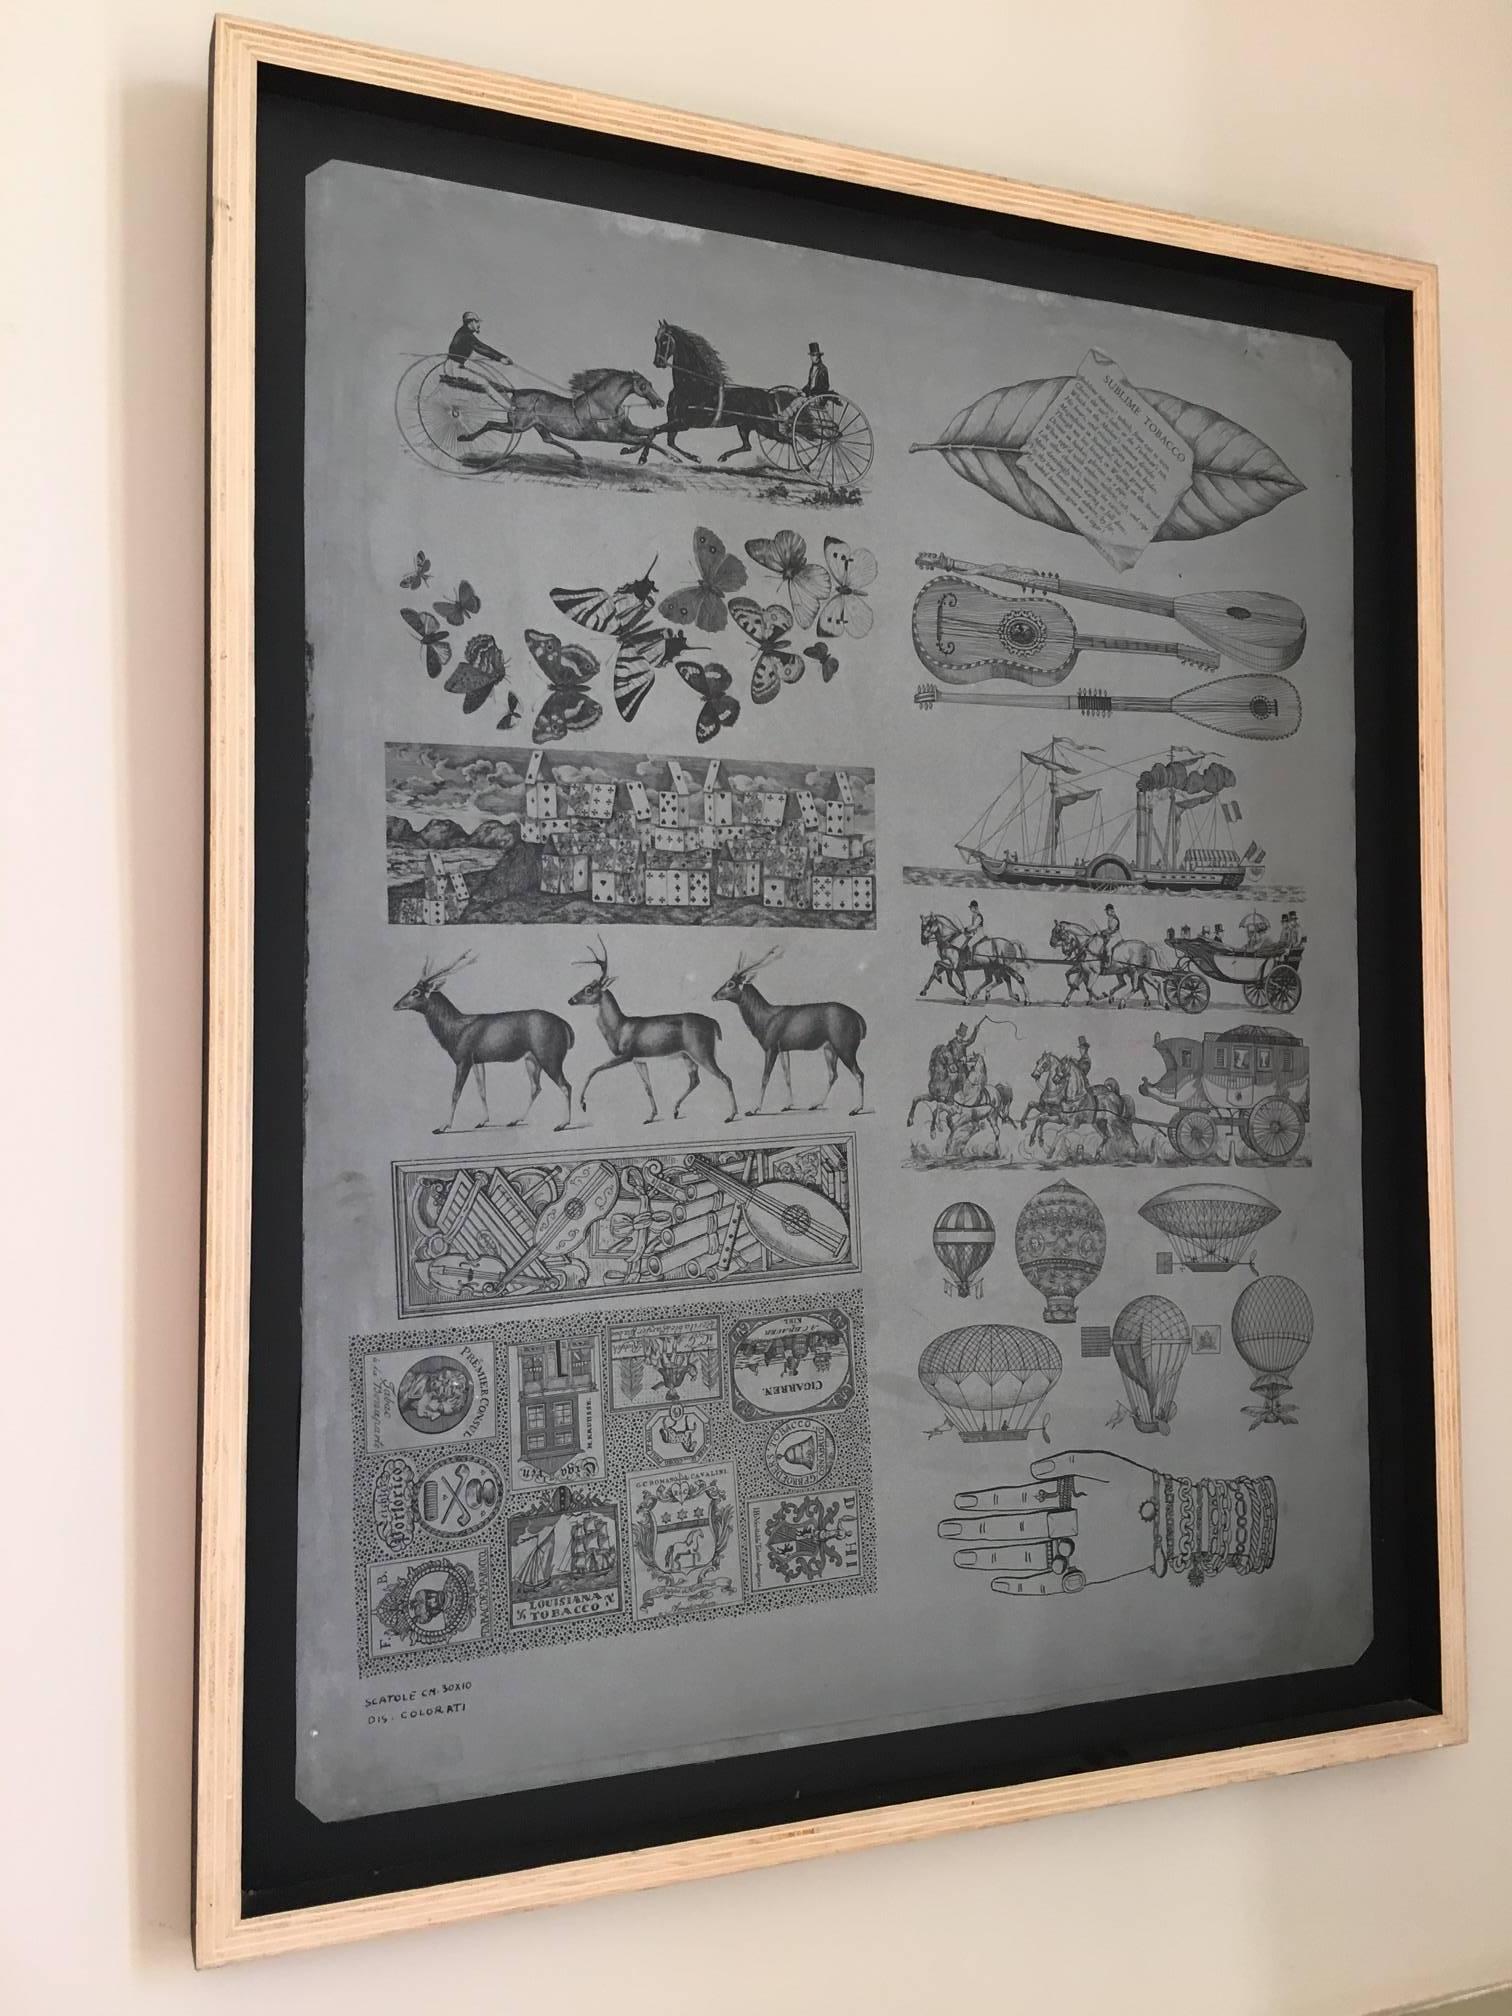 An original Fornasetti zinc lithograph plate by Piero Fornasetti;
labeled lower left 